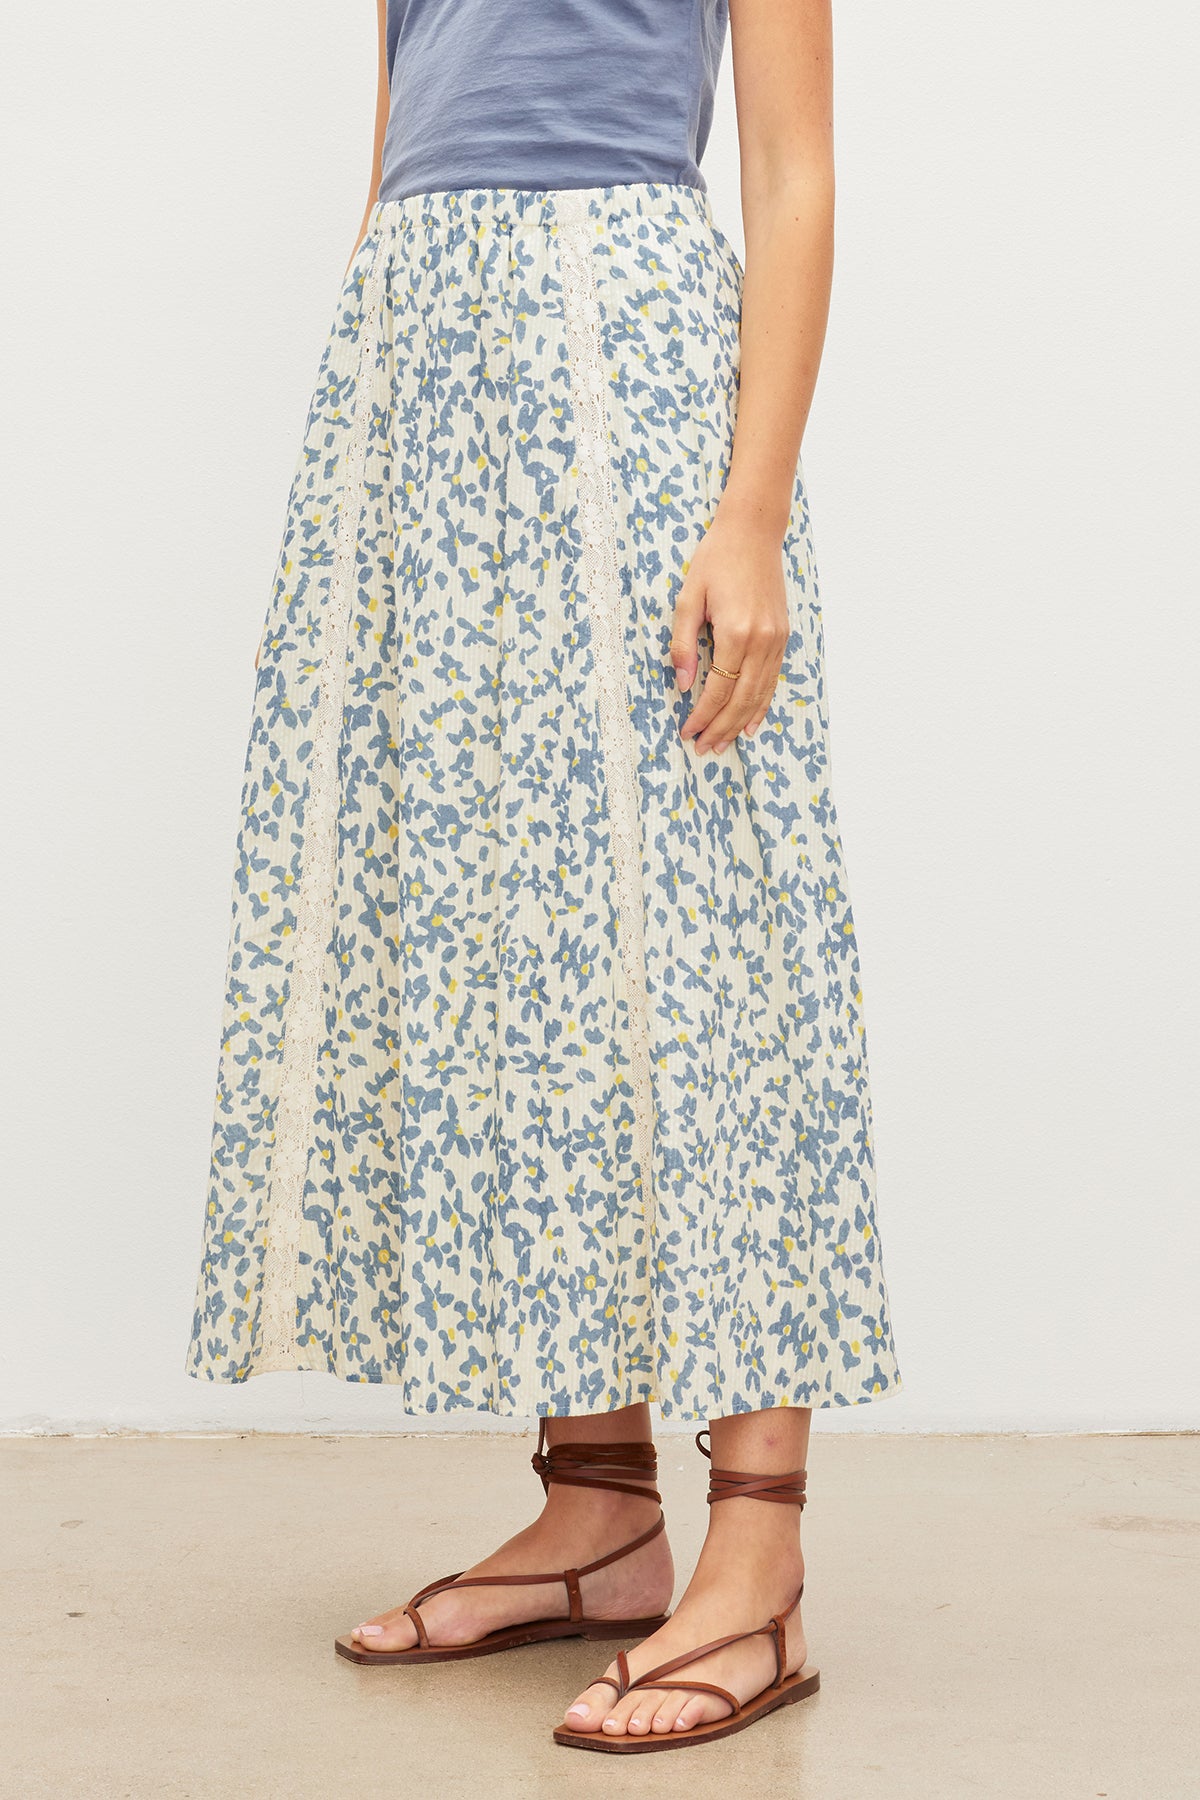   A woman wearing a KONA FLORAL LACE MAXI SKIRT from Velvet by Graham & Spencer with an elastic waist. 